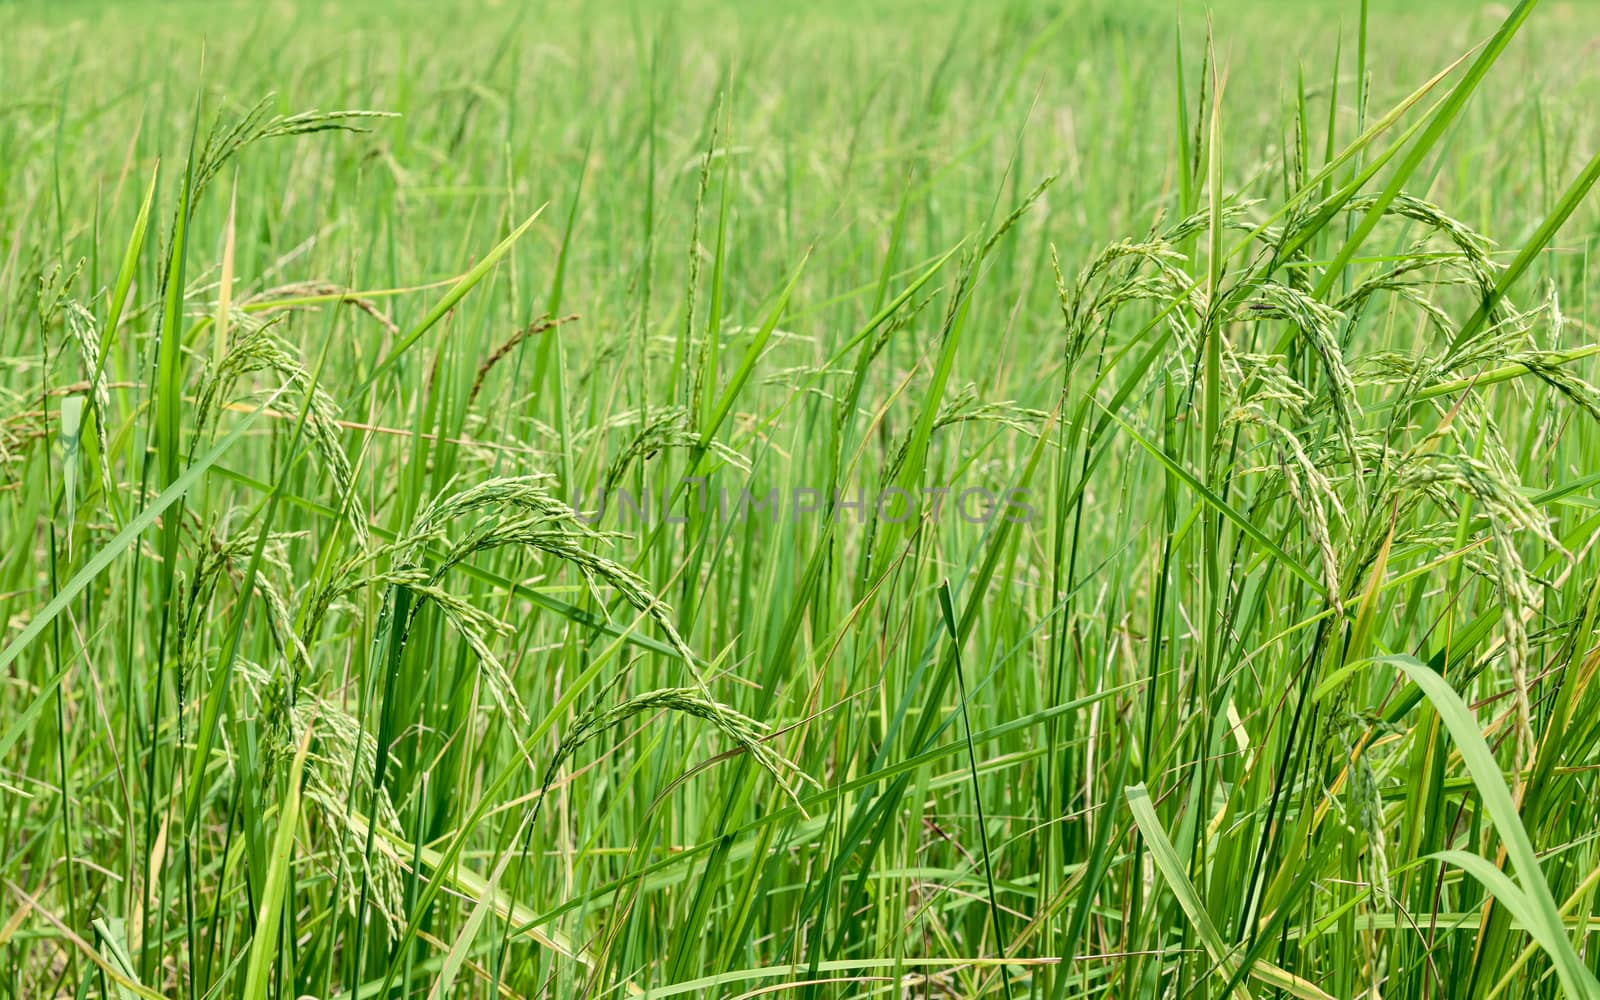 Harvest rice at paddy rice field  at the South of Thailand  side.